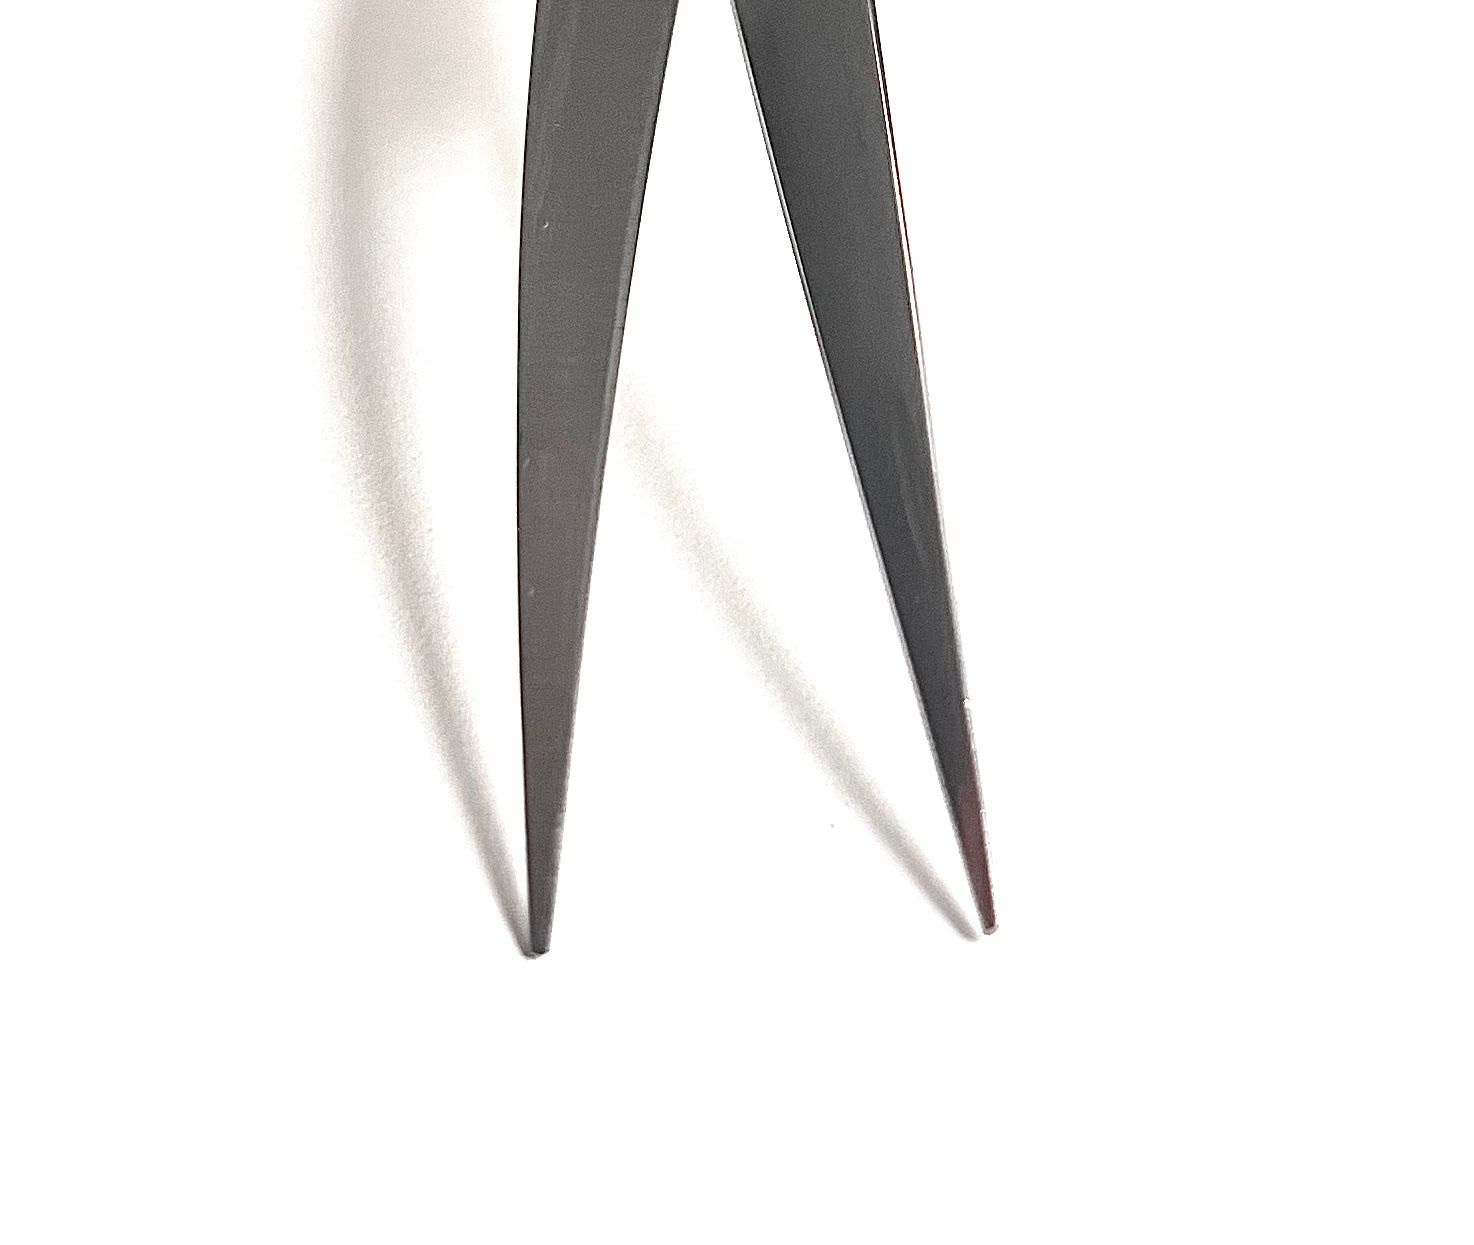 curved dog grooming scissor-curved grooming shear- curved shears for dog grooming- curved scissors for dog grooming-Abbfabb